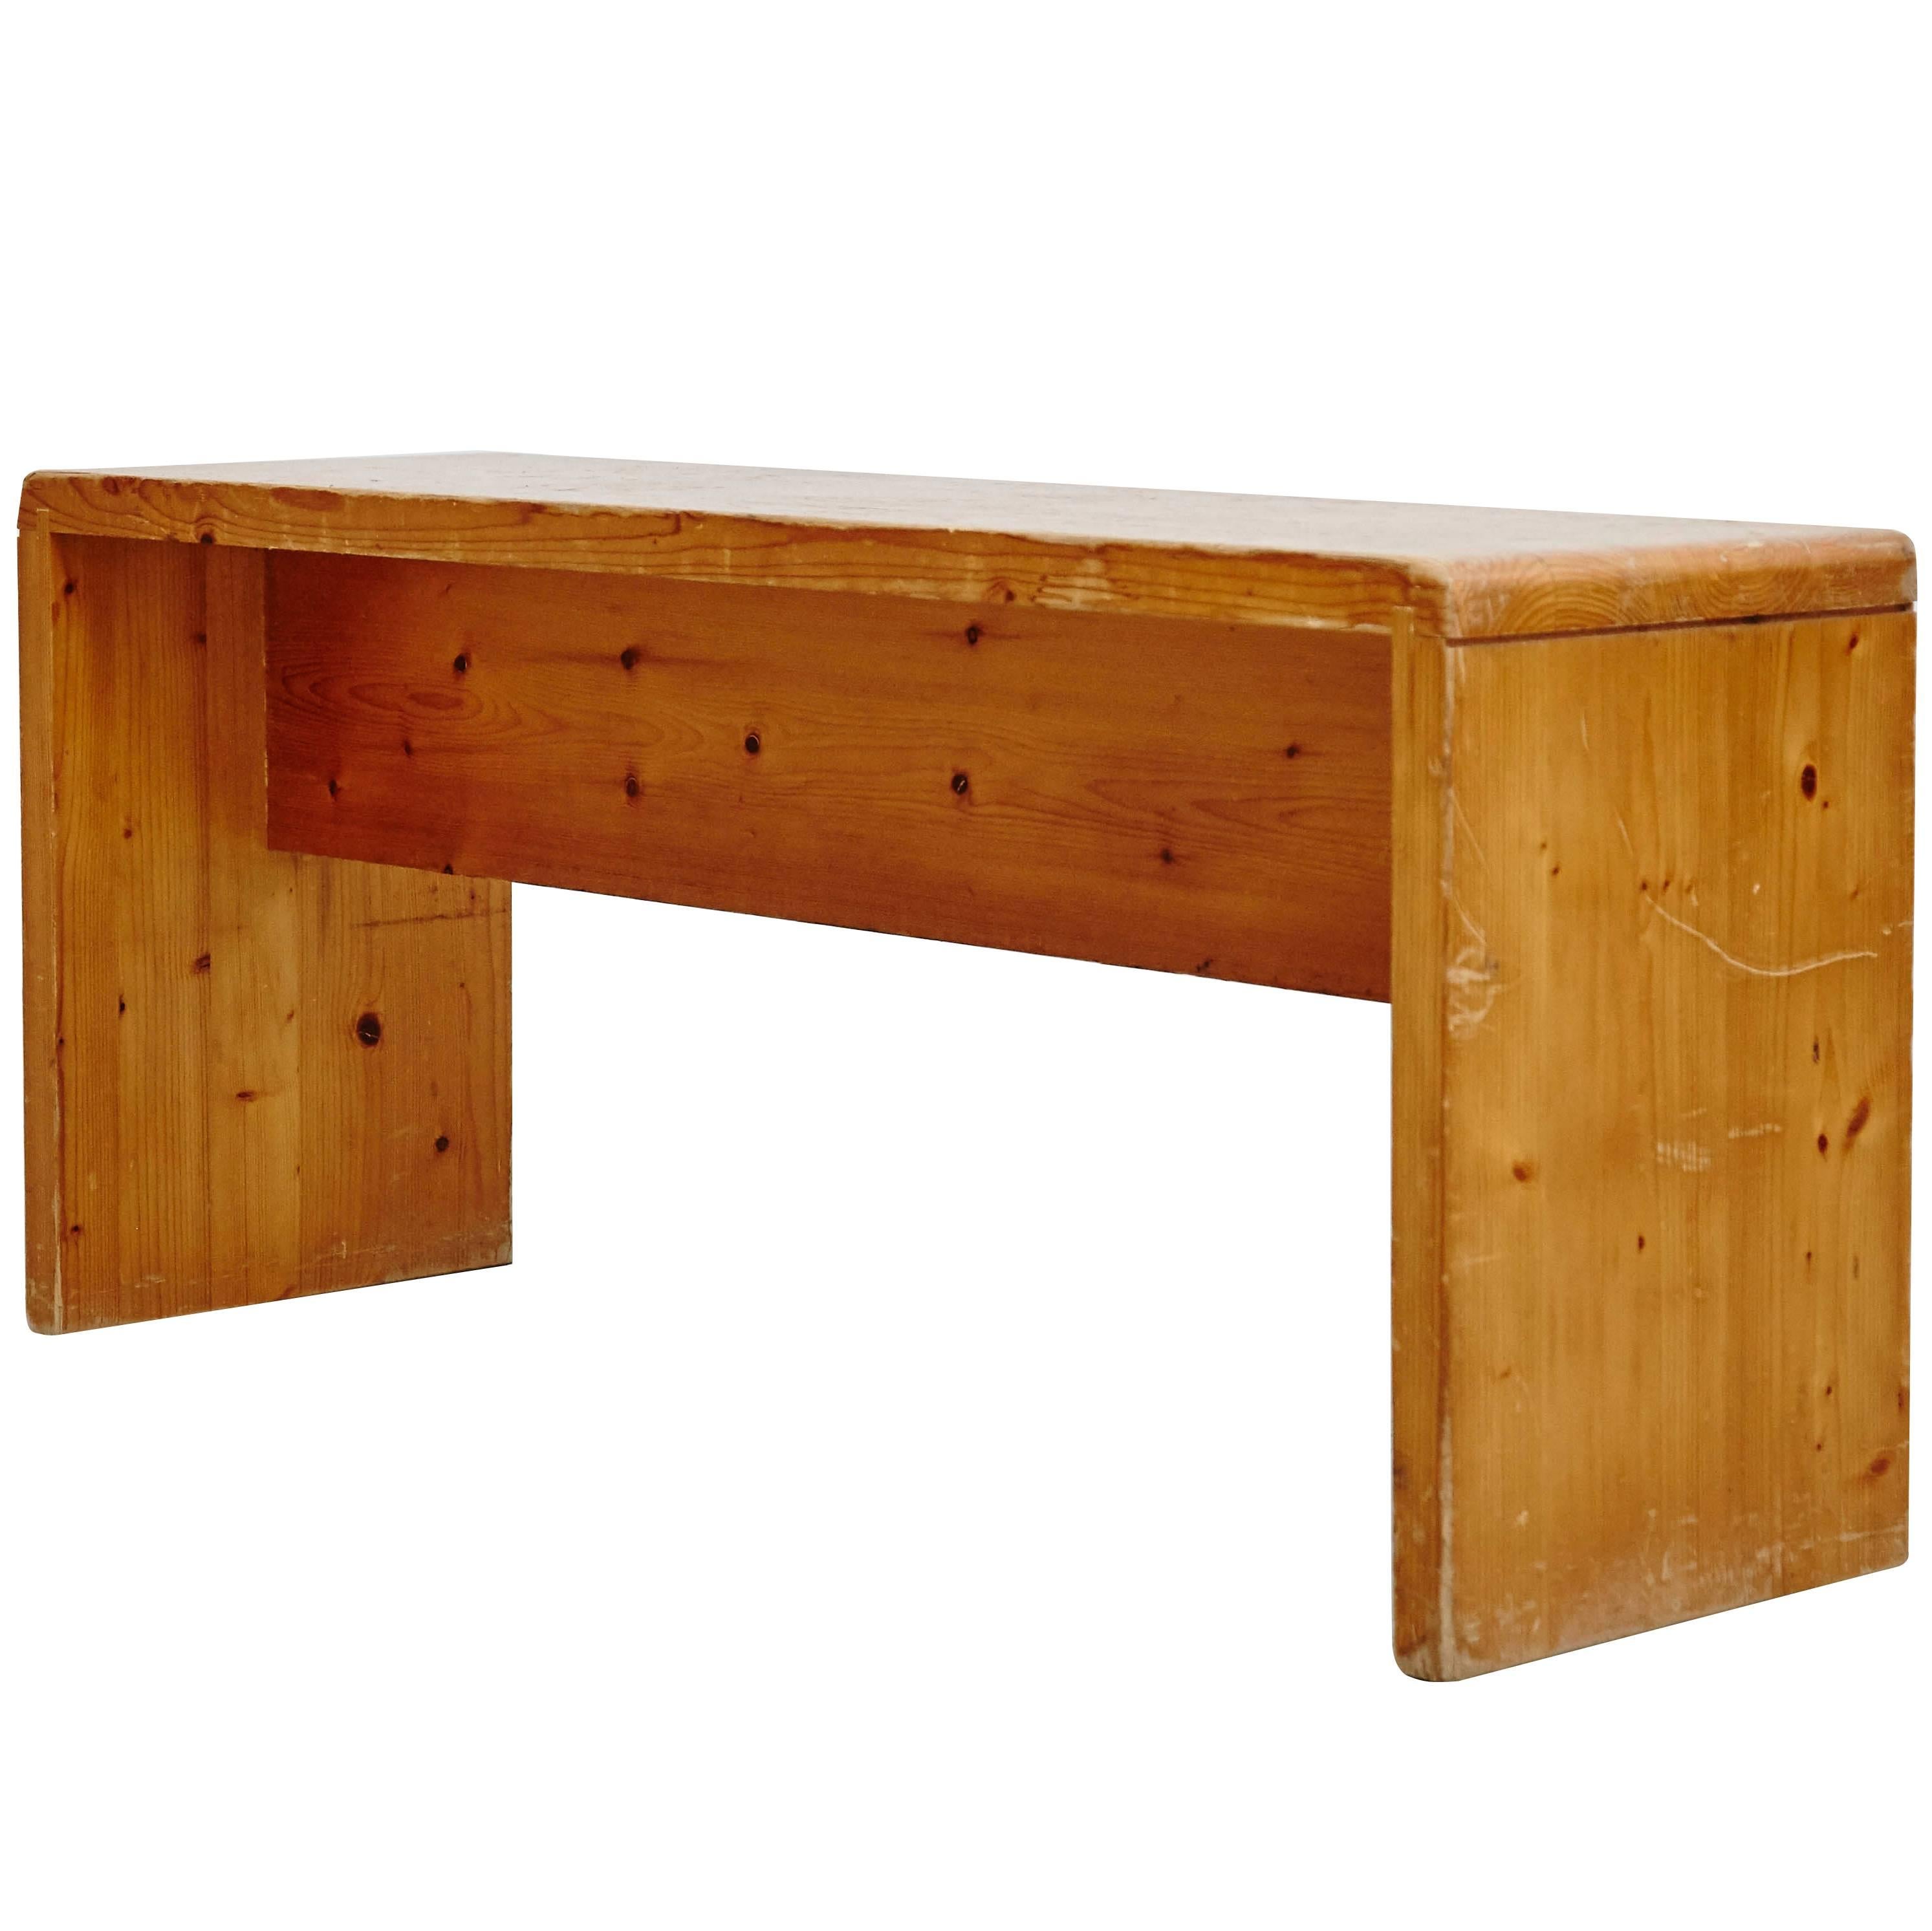 Charlotte Perriand Bench for Les Arcs